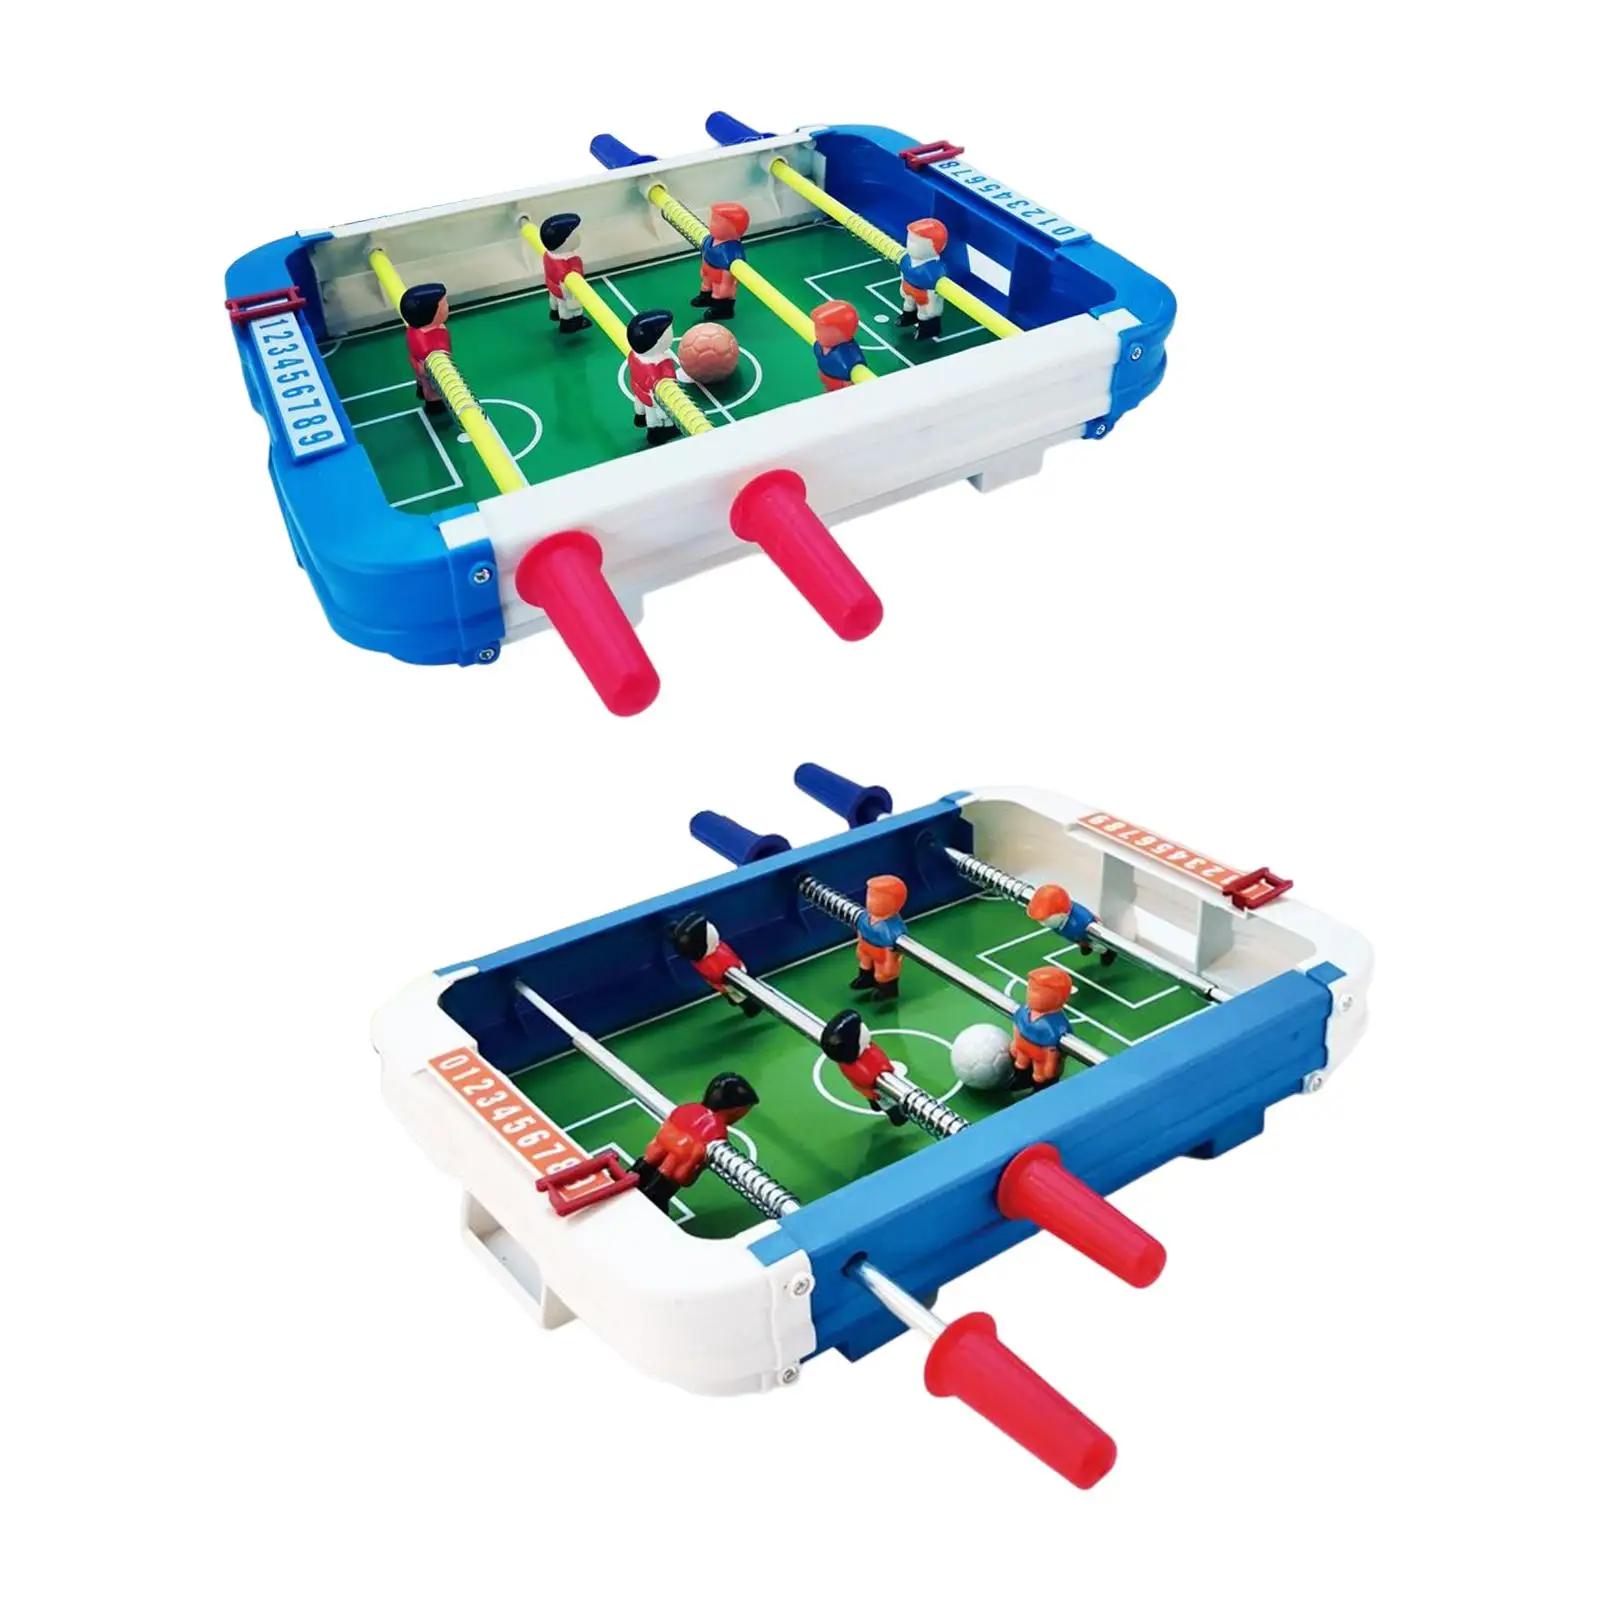 Foosball Table Top Football Game Table Soccer for Kids Holiday Gifts